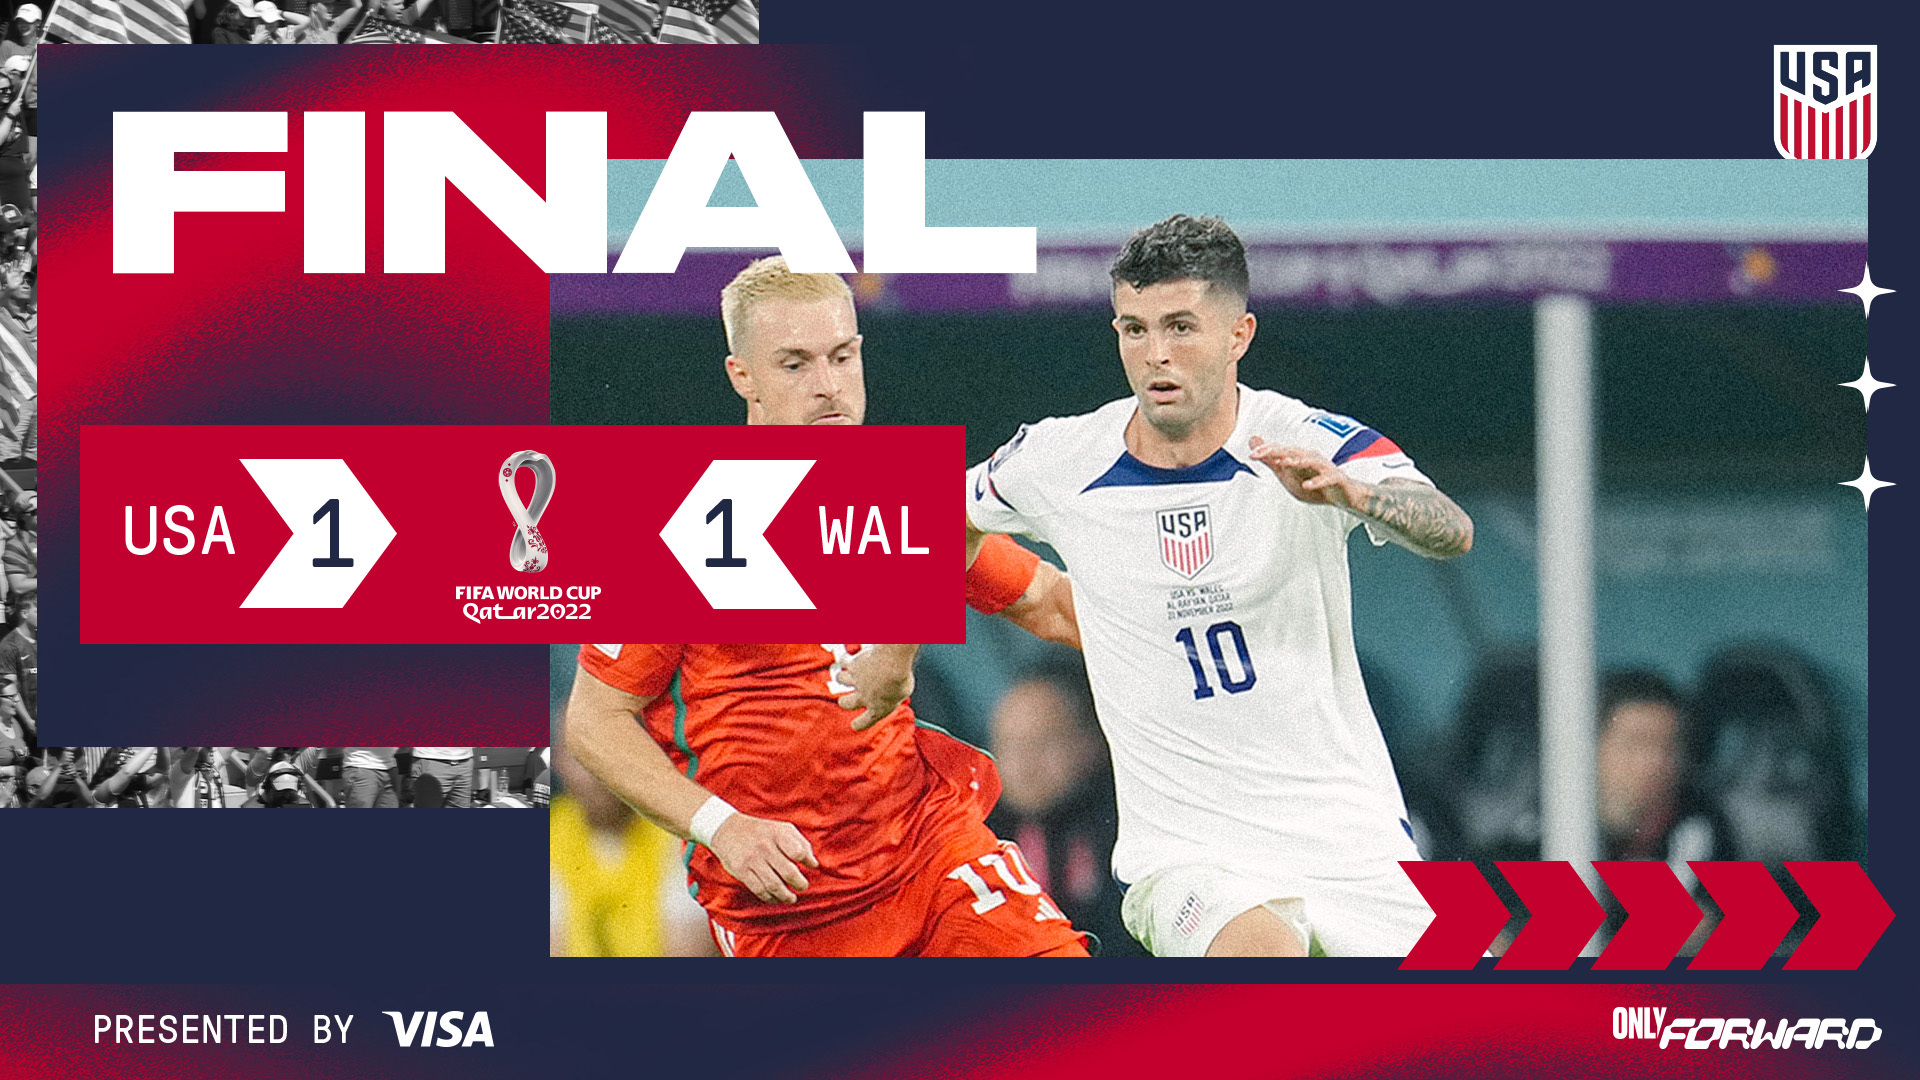 U.S. Men's National Team Kicks Off The 2022 FIFA World Cup With 1-1 Draw  Against Wales As Forward Tim Weah Scores First Half Goal